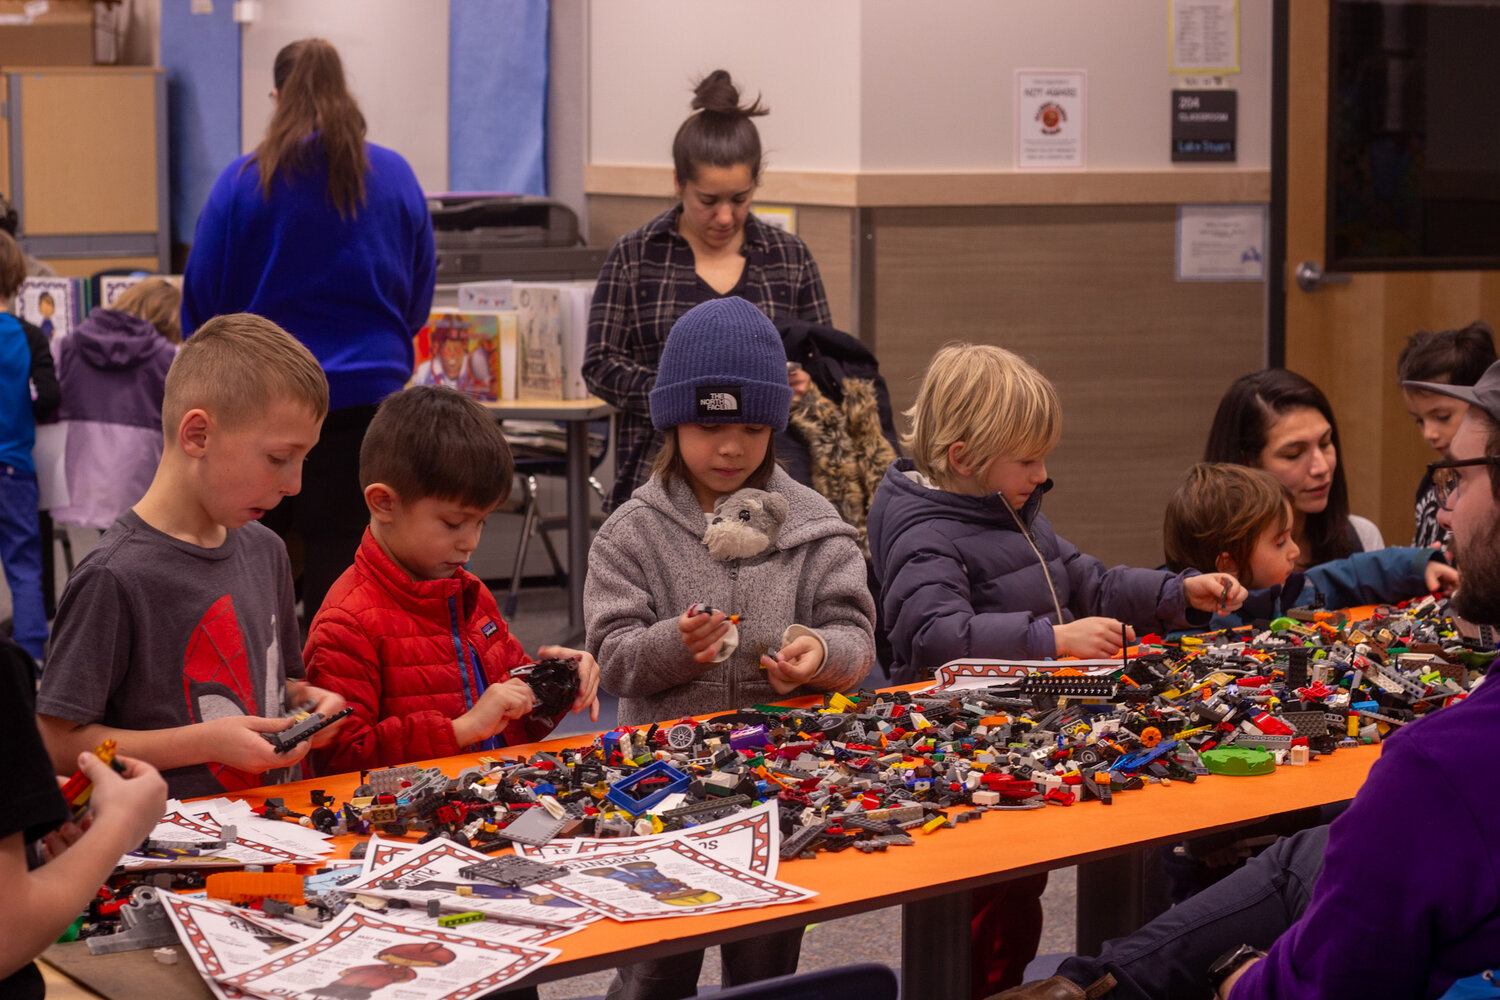 Students explore building and engineering through Legos.